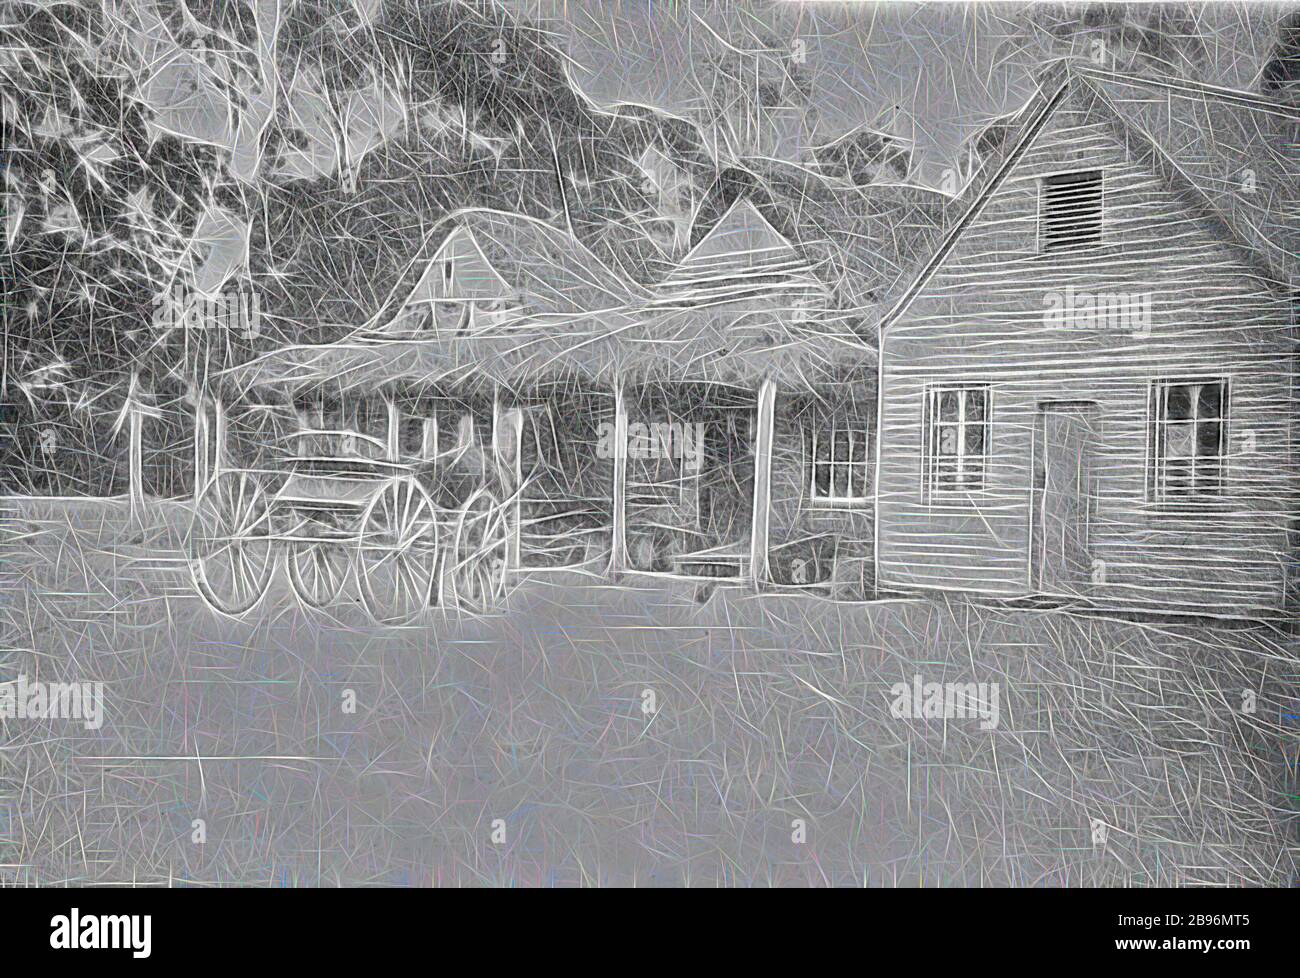 Negative - Eastville, Victoria, circa 1885, An early photograph of the Shootem Flying Inn with a thatched roof. There is a horse and cart in front of the inn., Reimagined by Gibon, design of warm cheerful glowing of brightness and light rays radiance. Classic art reinvented with a modern twist. Photography inspired by futurism, embracing dynamic energy of modern technology, movement, speed and revolutionize culture. Stock Photo